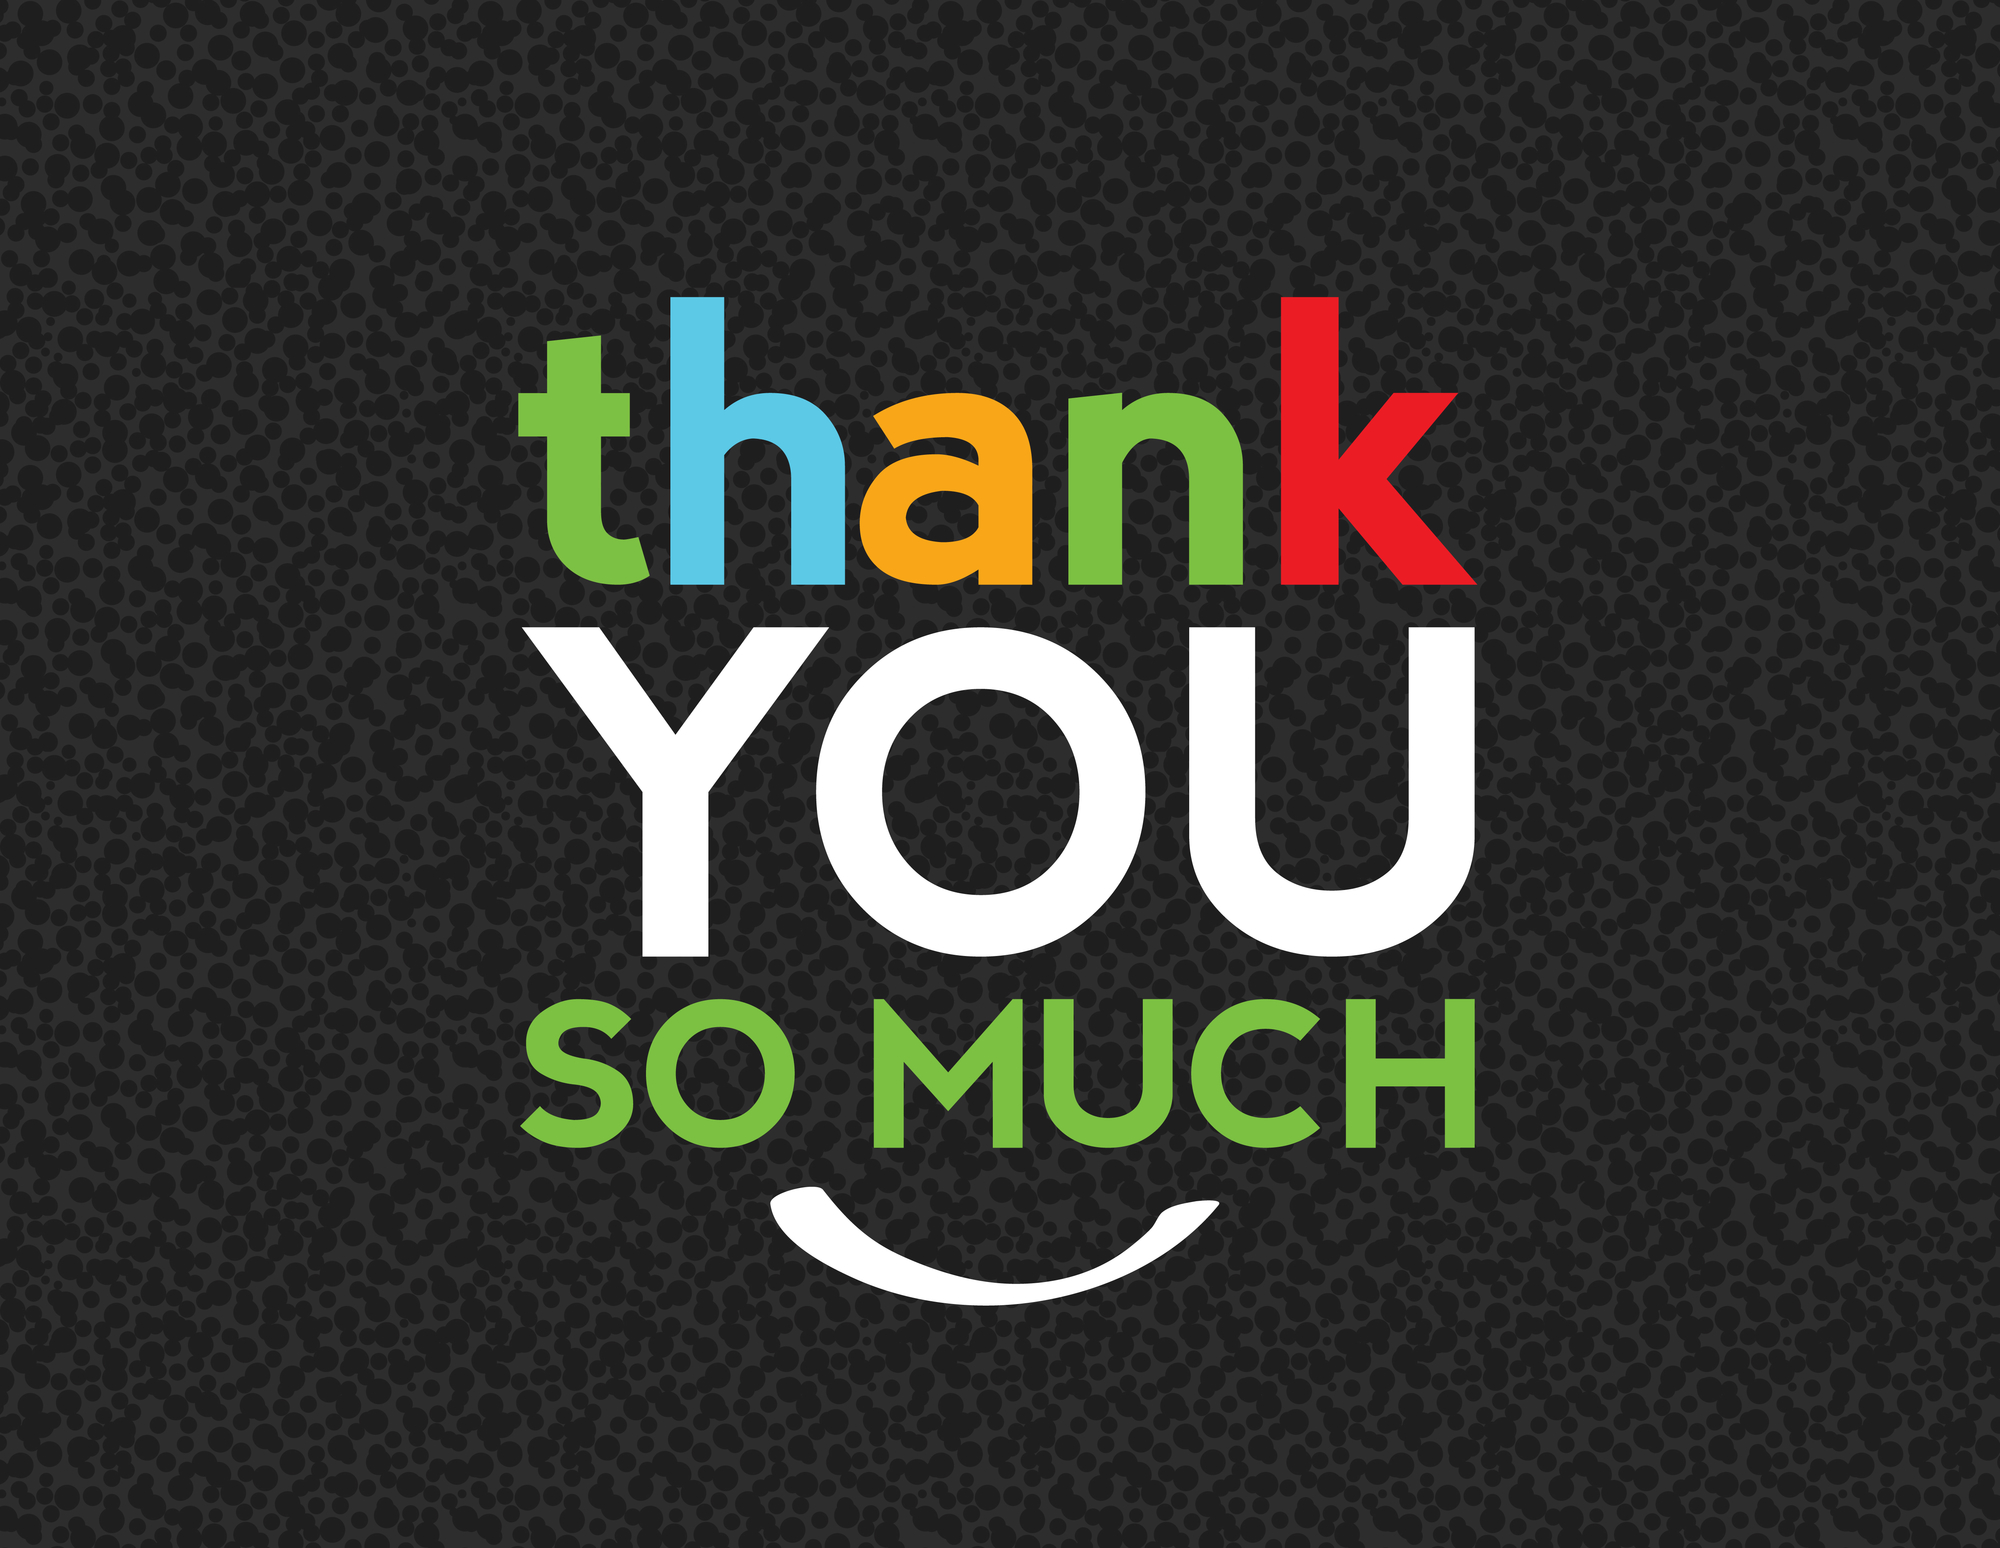 Images Of Thank You So Much Wallpaper For Iphone with HD Wallpaper